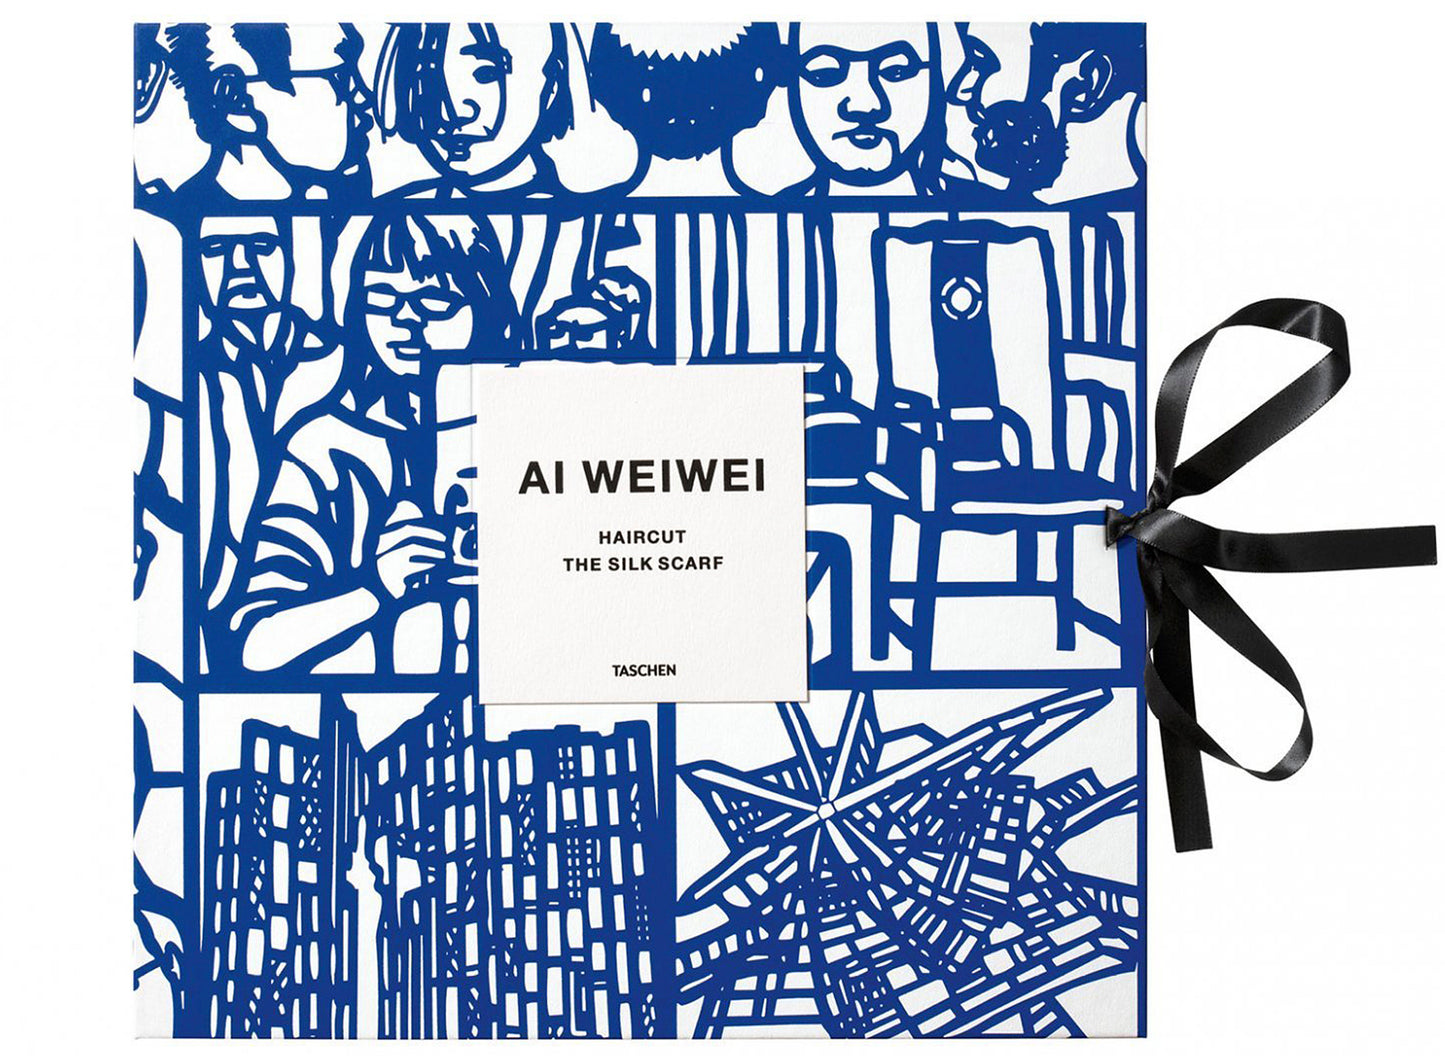 Taschen Limited Edition 'Haircut' Scarf by Ai Weiwei